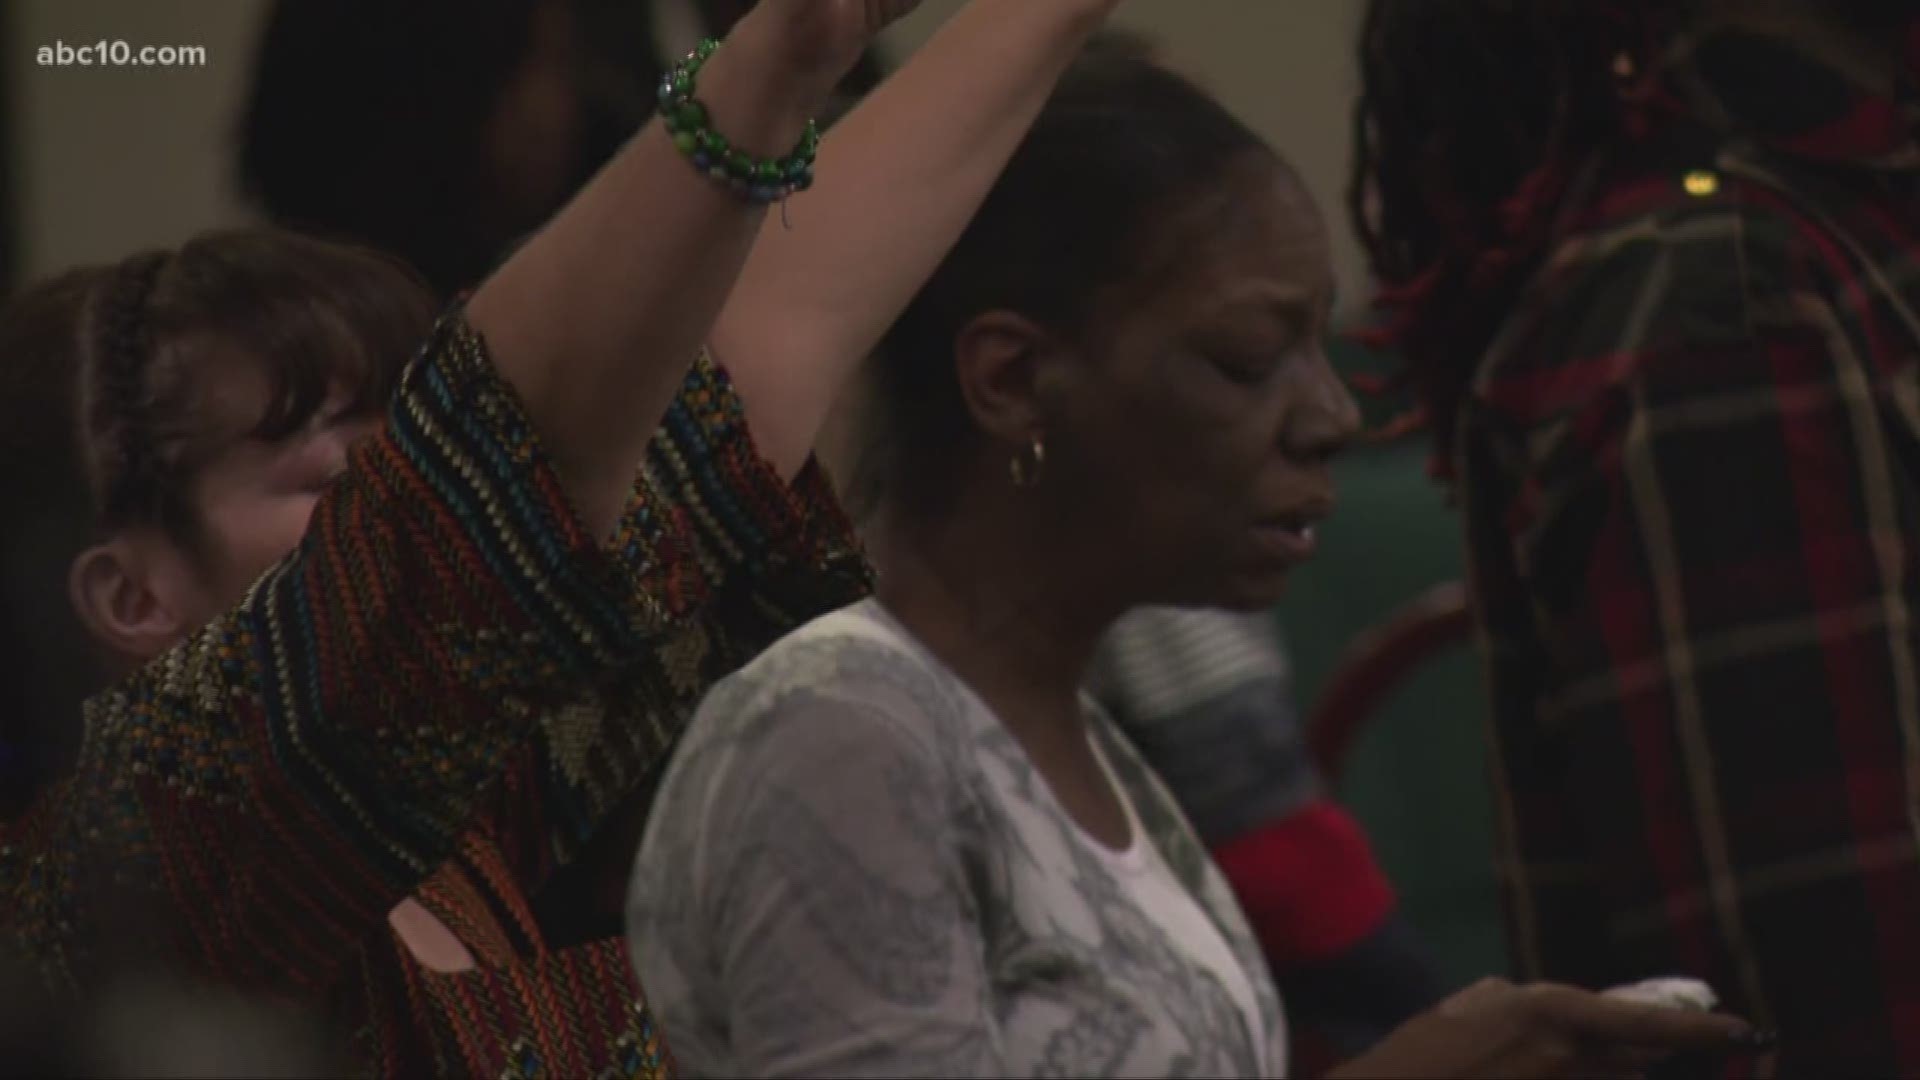 Some church goers South Sacramento Christian Center feel that Stephon Clark died twice after the Sacramento County District Attorney's decision to not prosecute the officers involved his shooting death. Now, they turn toward faith to get through hard times.